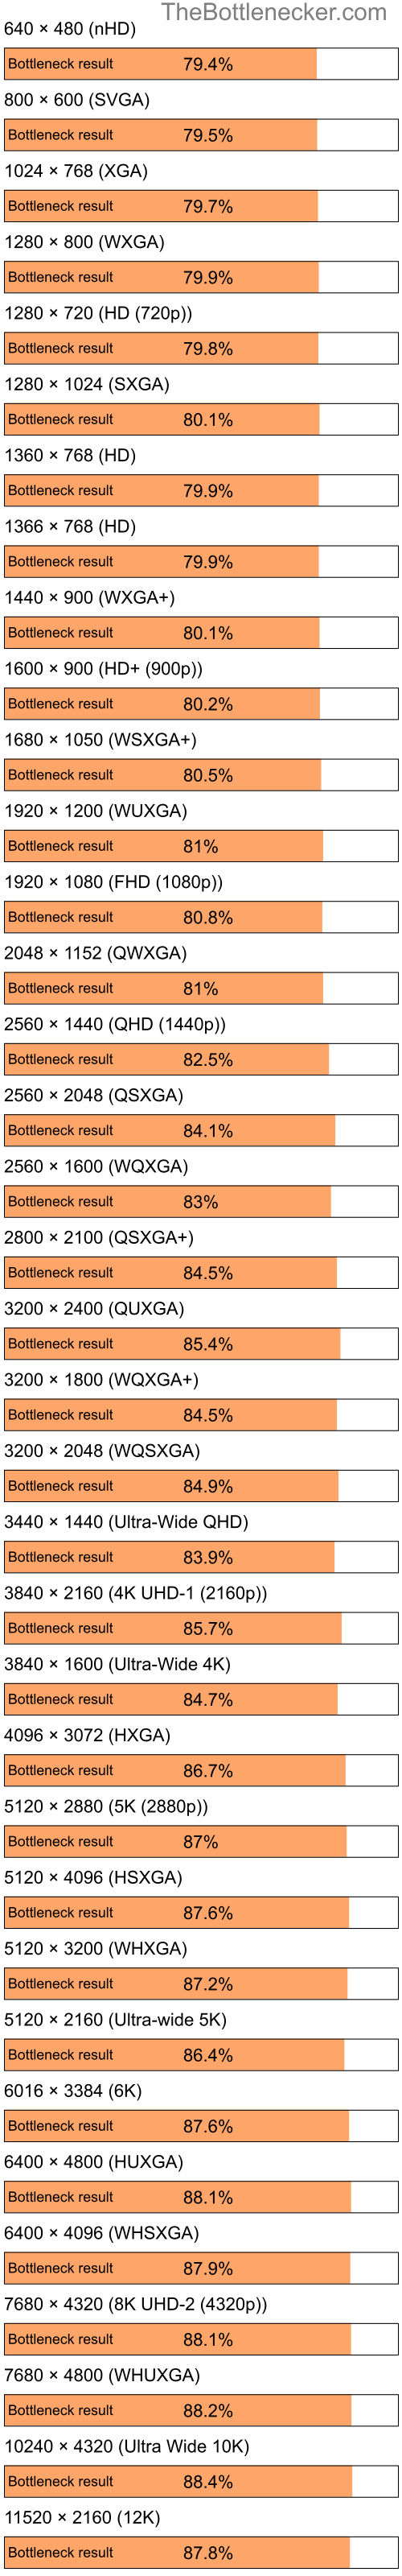 Bottleneck results by resolution for Intel Pentium 4 and NVIDIA GeForce 7300 SE in Graphic Card Intense Tasks